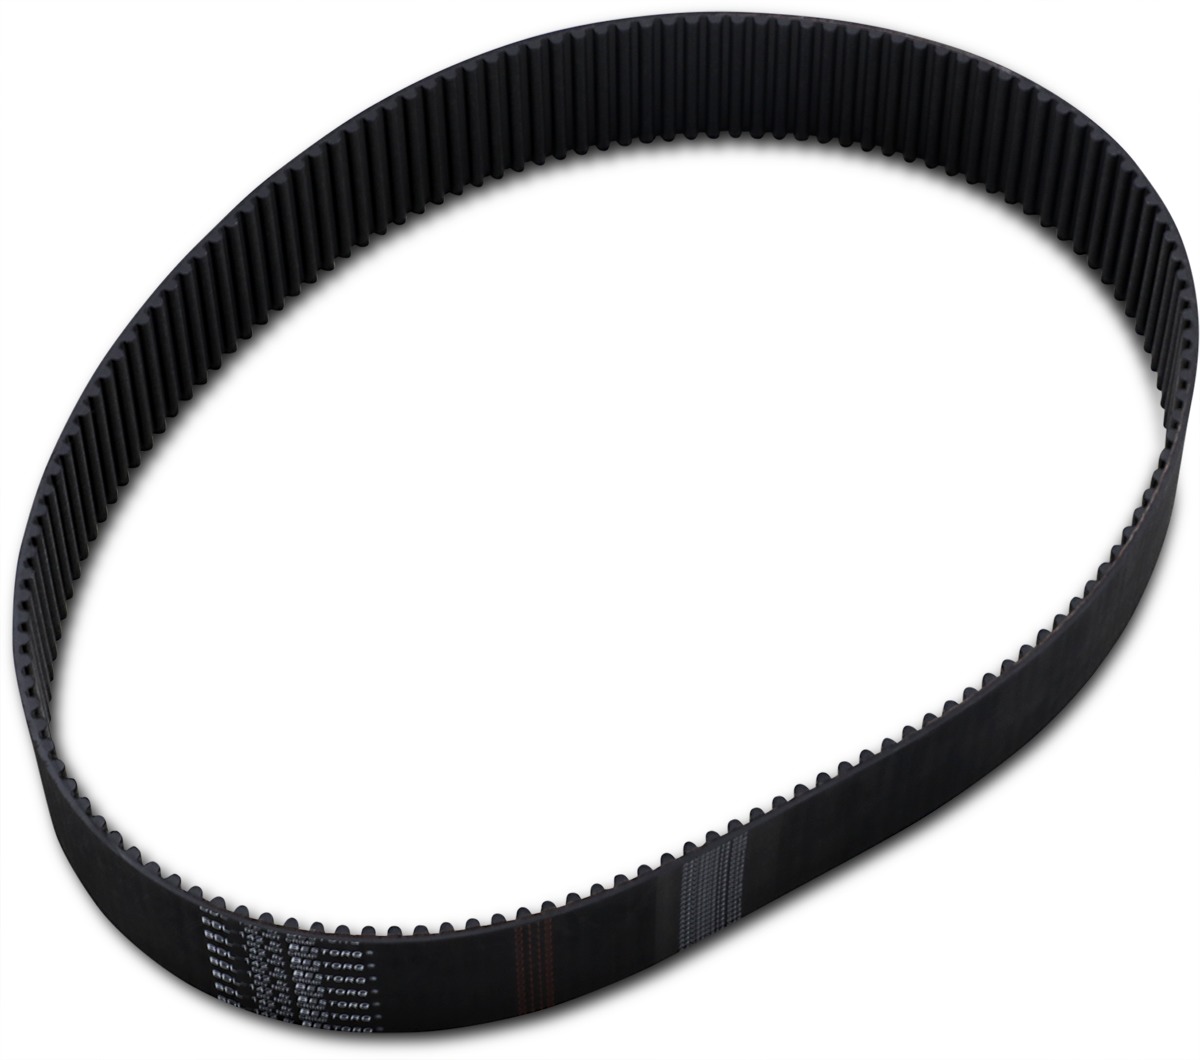 Primary Drive Replacement Belt - Replcmnt Belt For 2-3/4" Drive - Click Image to Close